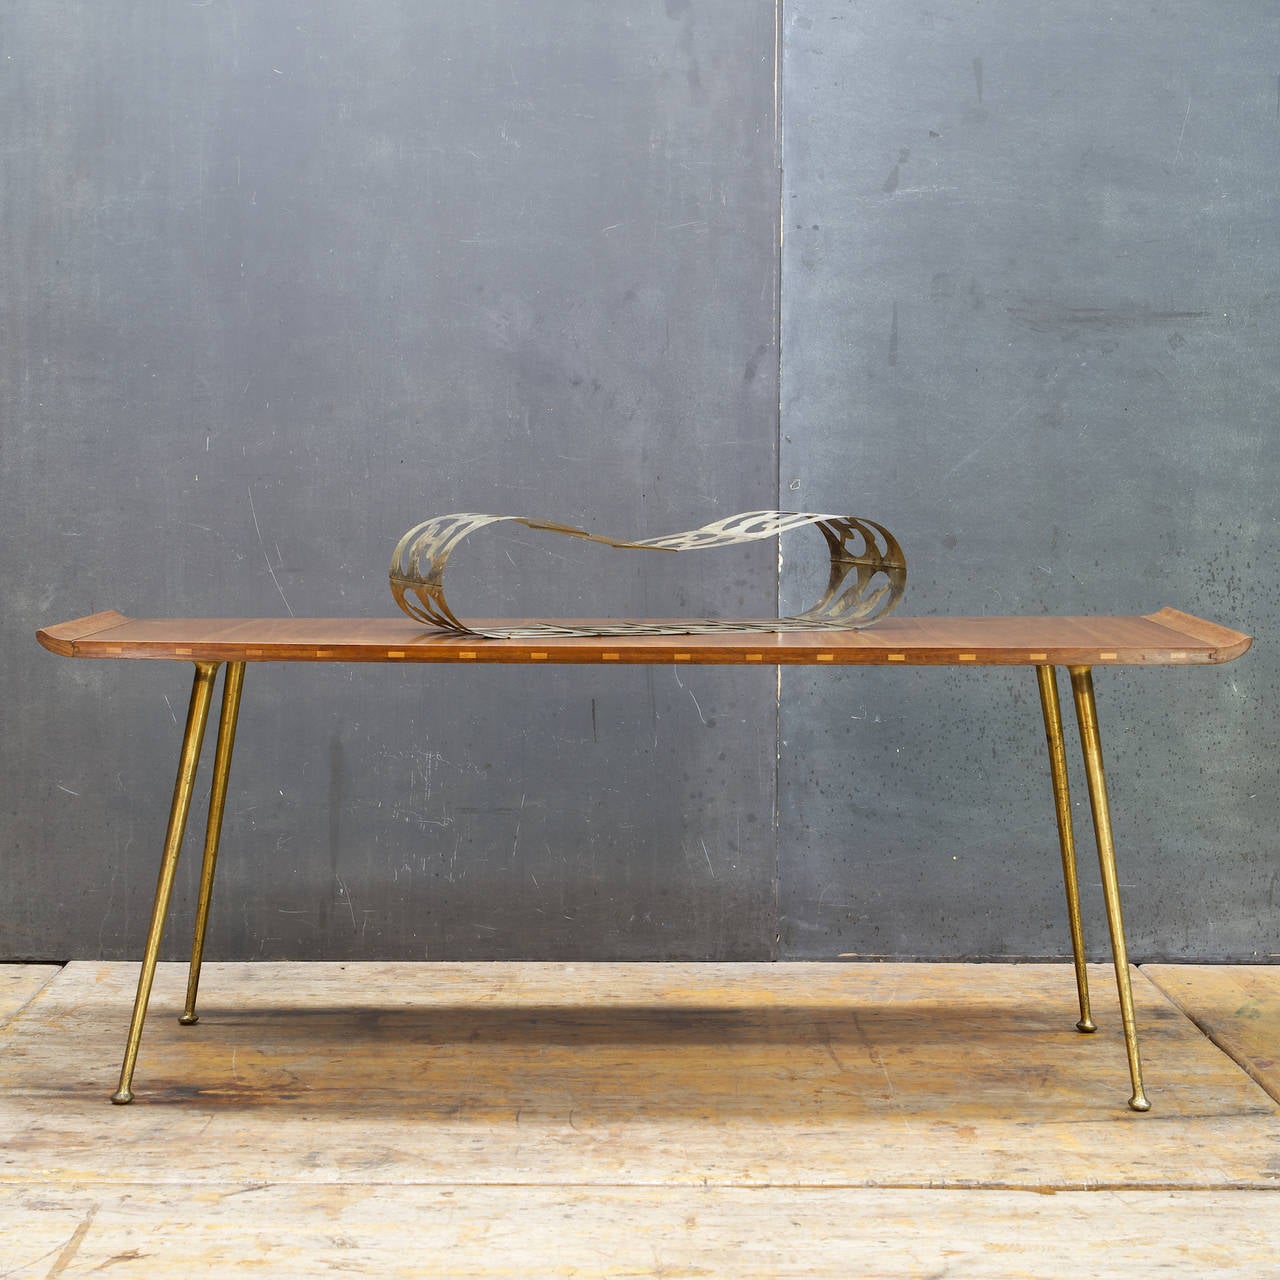 Antelope Splined & Winged Walnut, Brass Legged Sofa Coffee Table.  Lane marked Table Surface on salvaged Mid-Century Brass Slayed Legs.  Patina and Wear on all surfaces.  

W: 56¼ x D: 22 x H: 22 in.